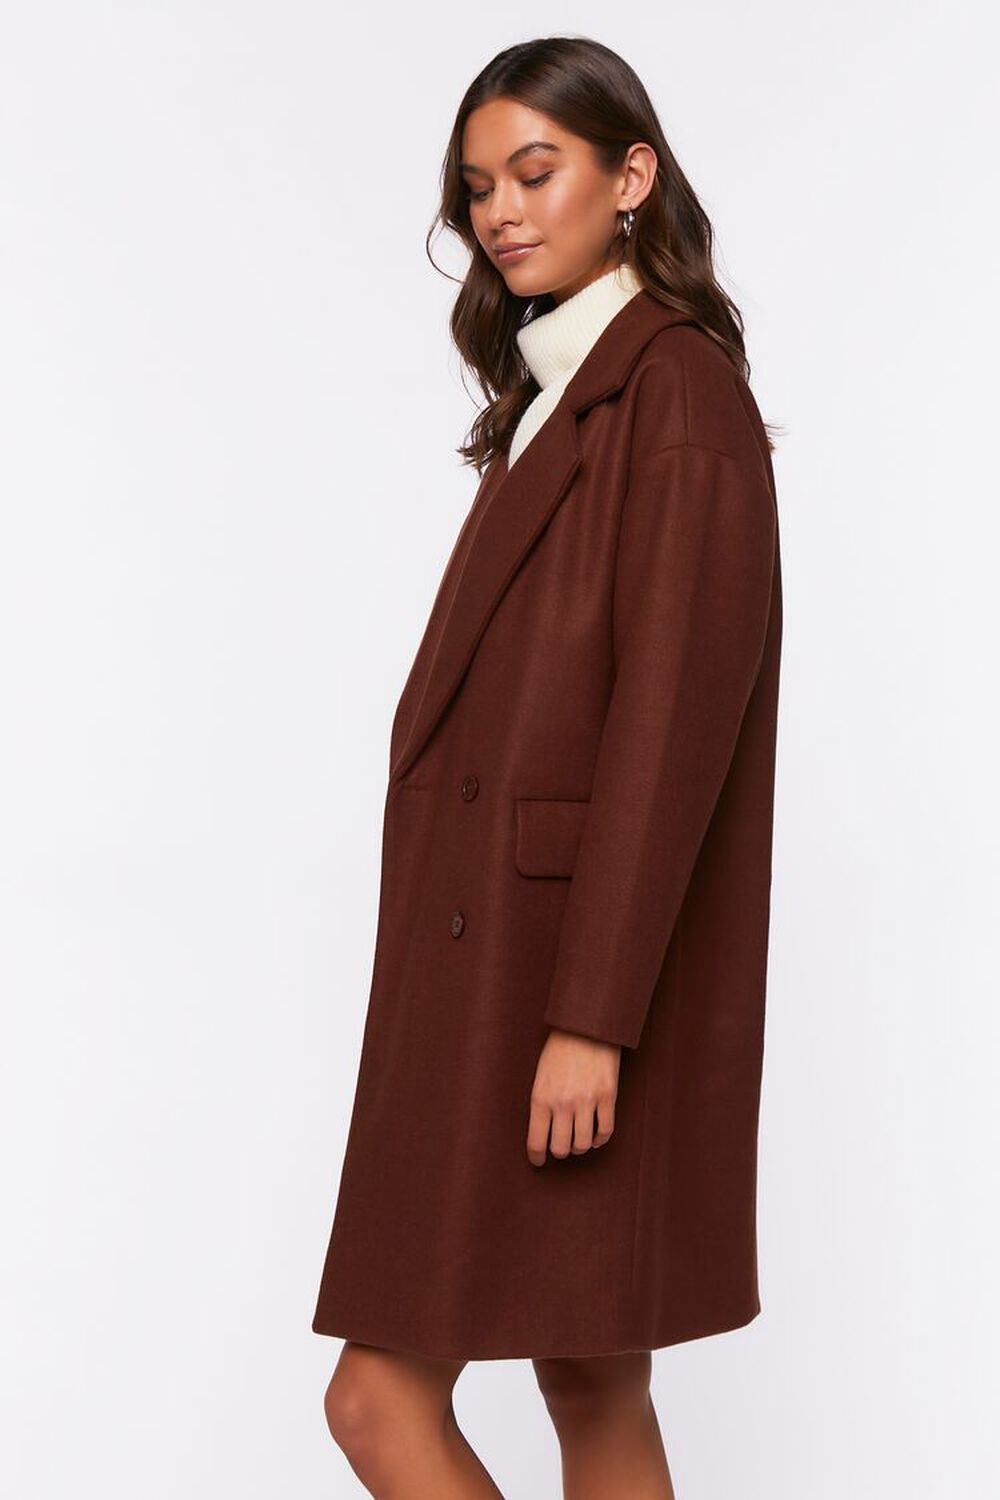 BROWN Double-Breasted Duster Coat, image 2